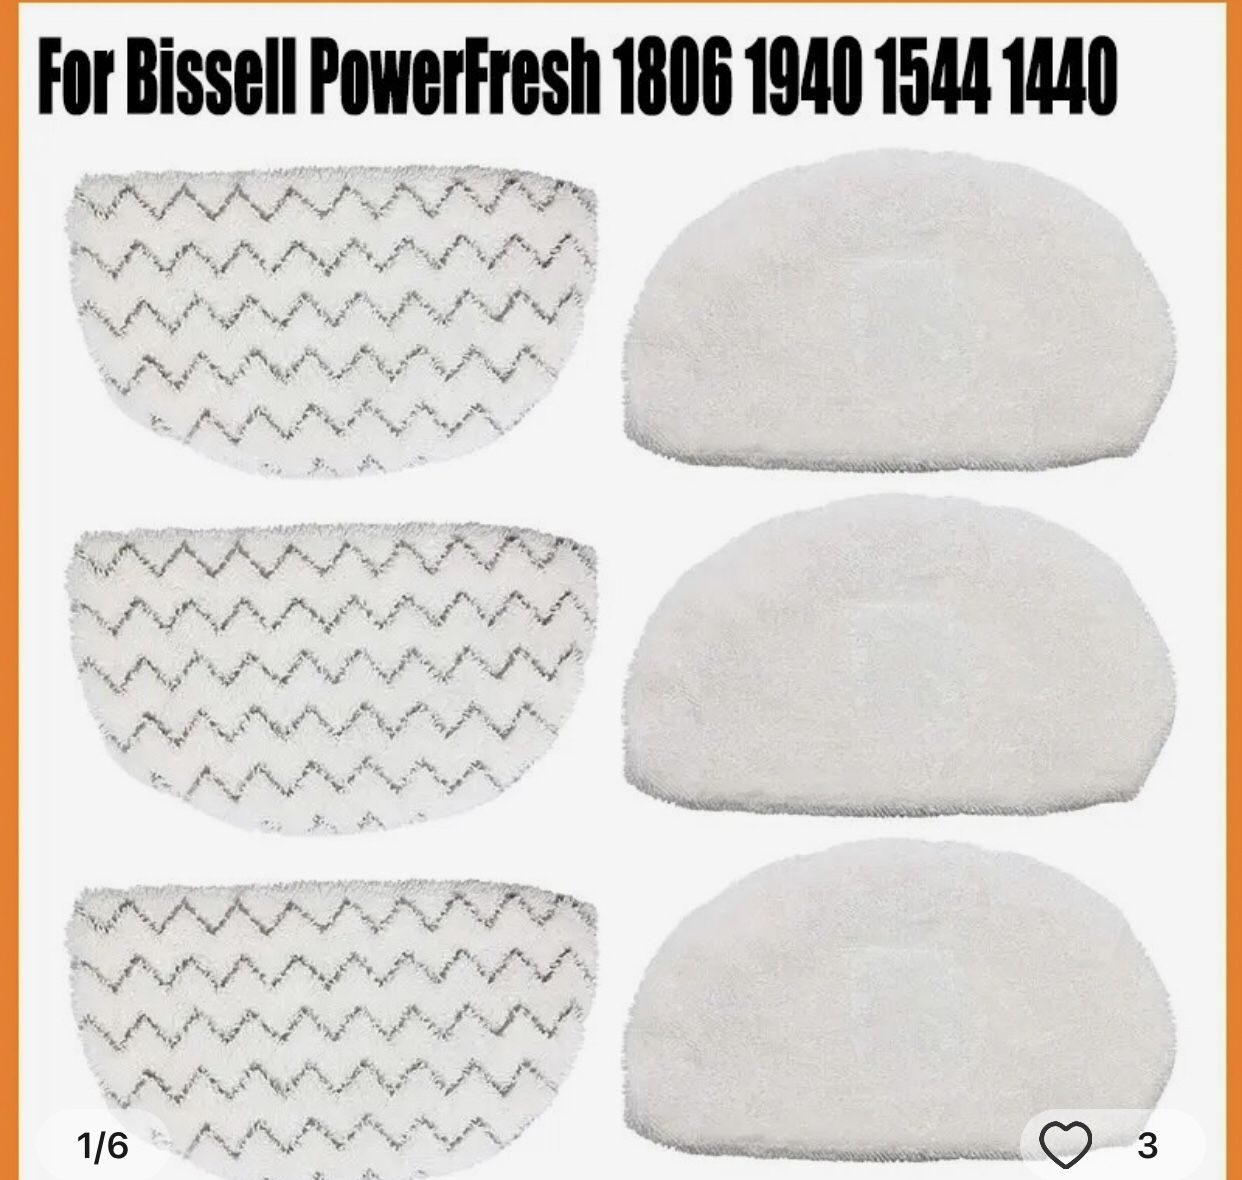 Washable Steam Mop Cloth Cleaning Pads Compatible For Bissell PowerFresh 1(contact info removed) 1(contact info removed) Replacement Cleaner Wipes Par